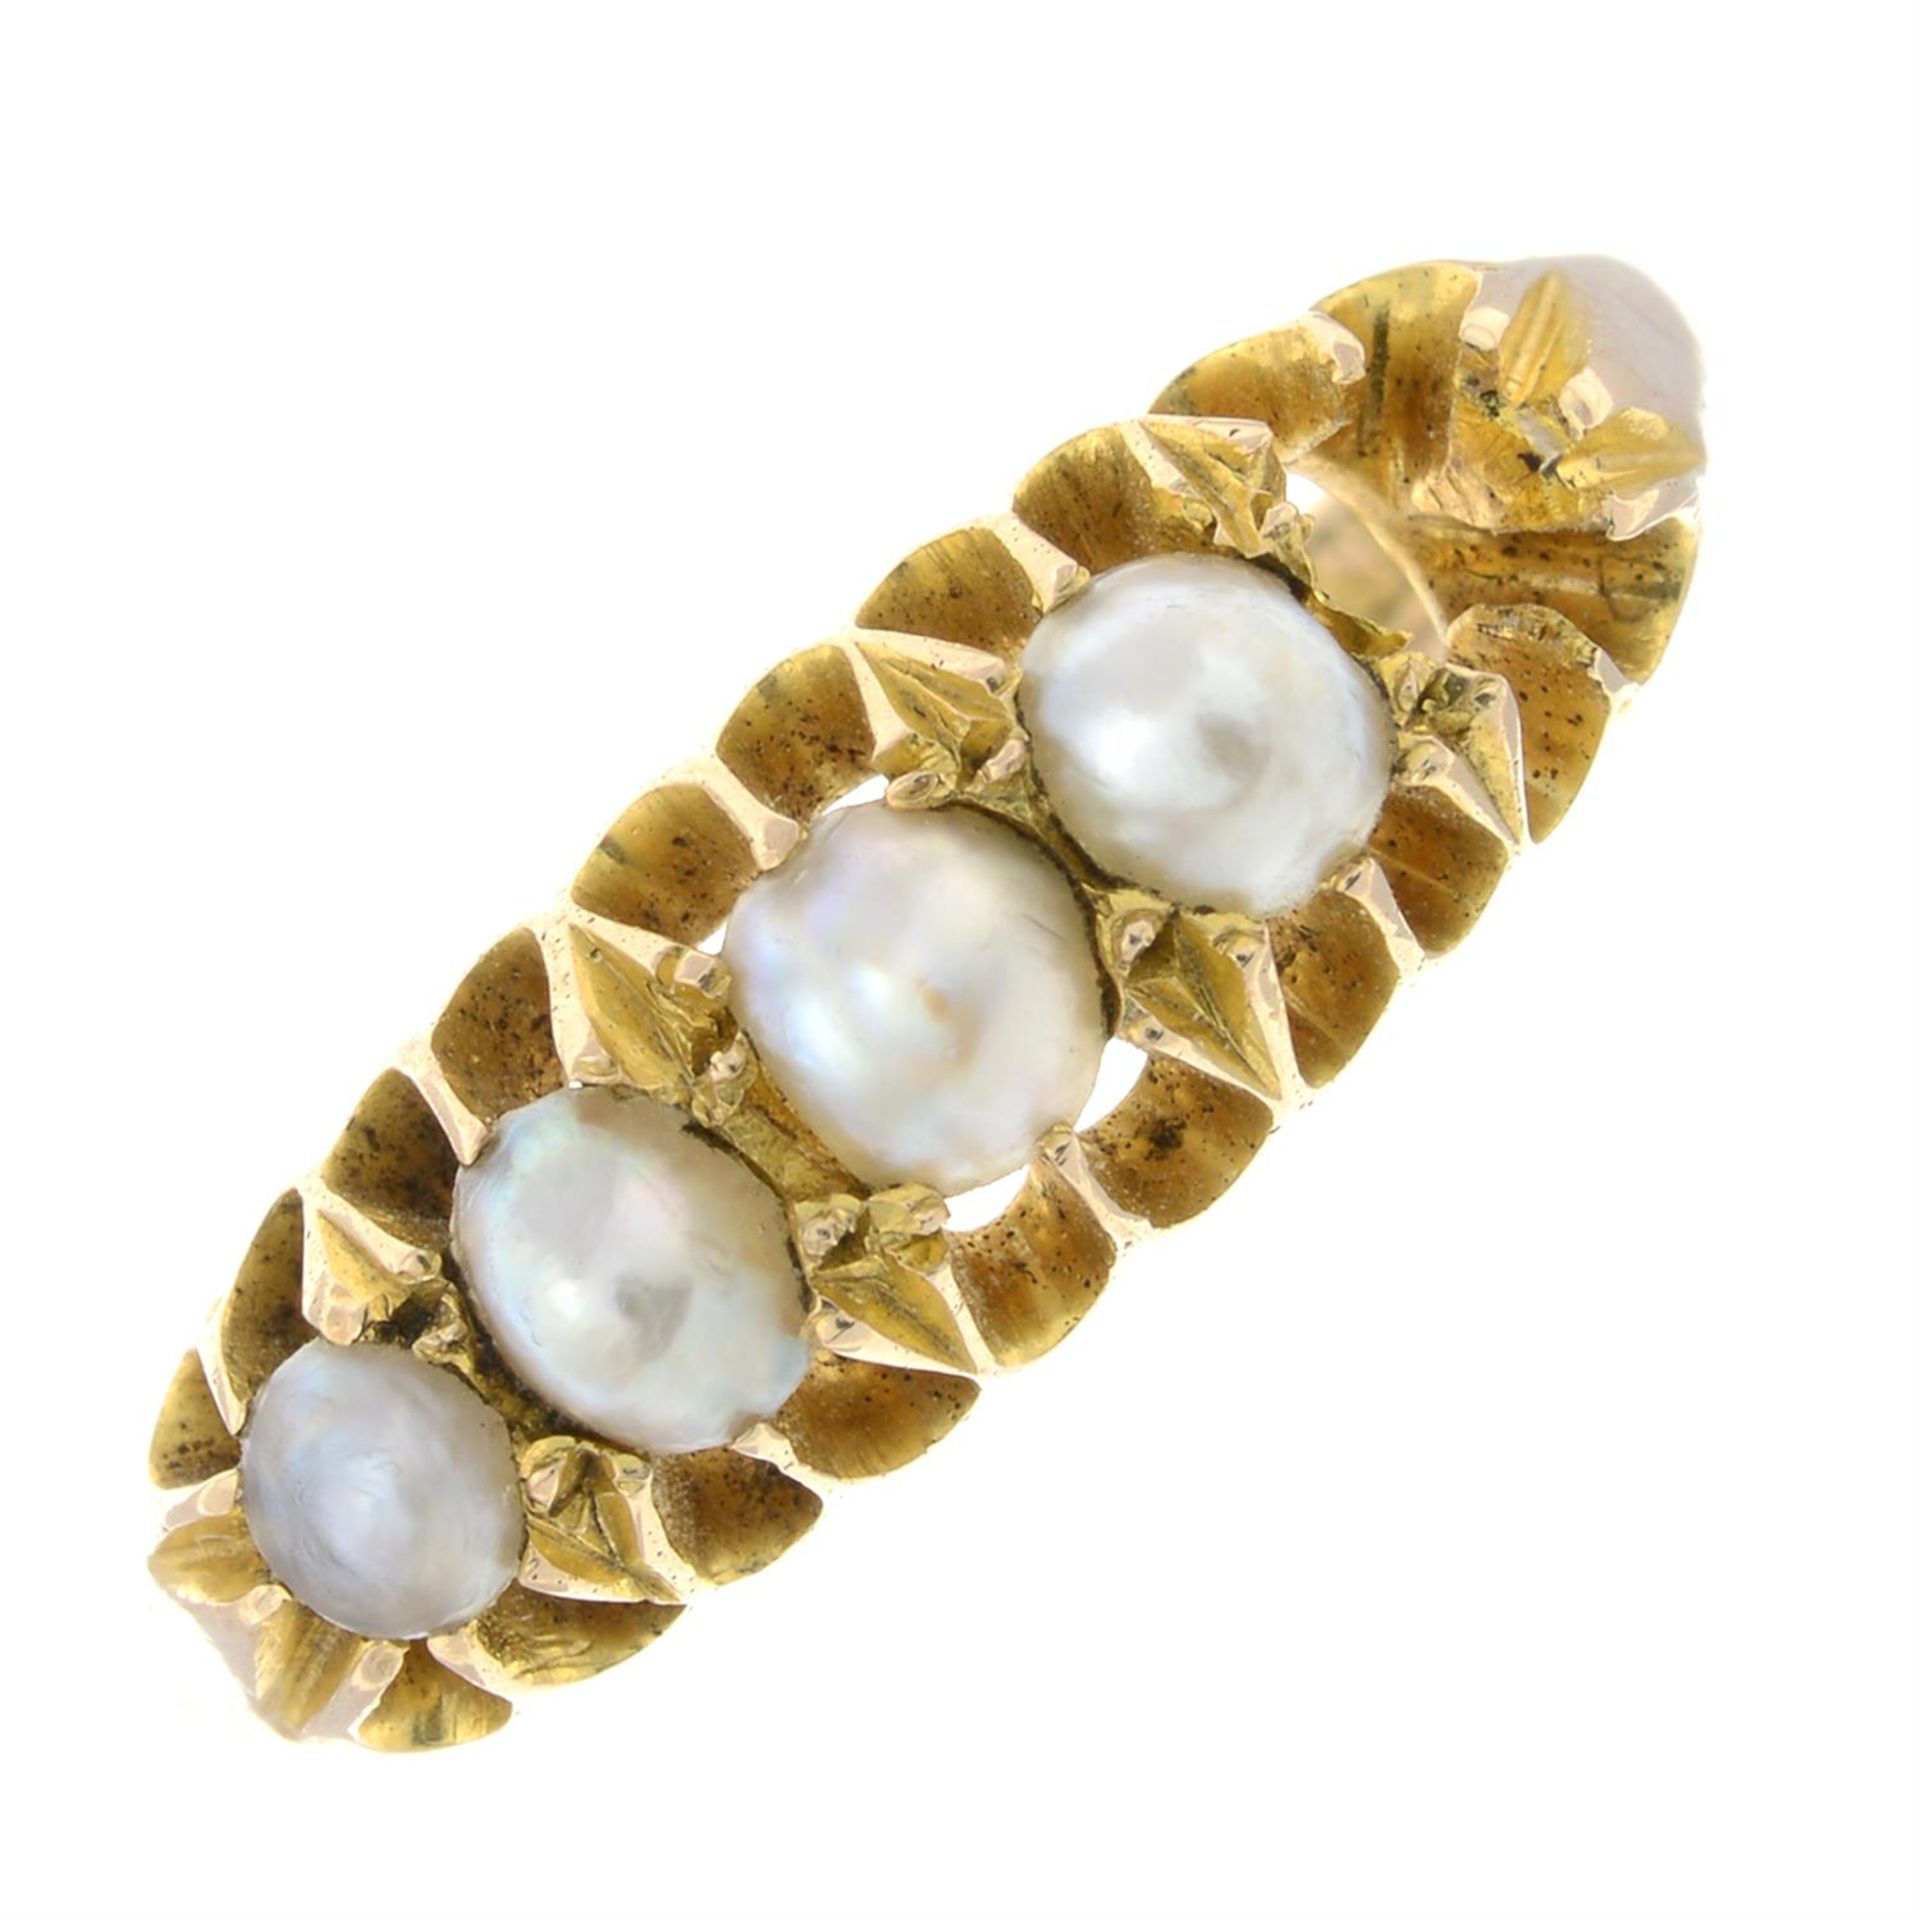 An early 20th century 15ct gold split pearl ring.